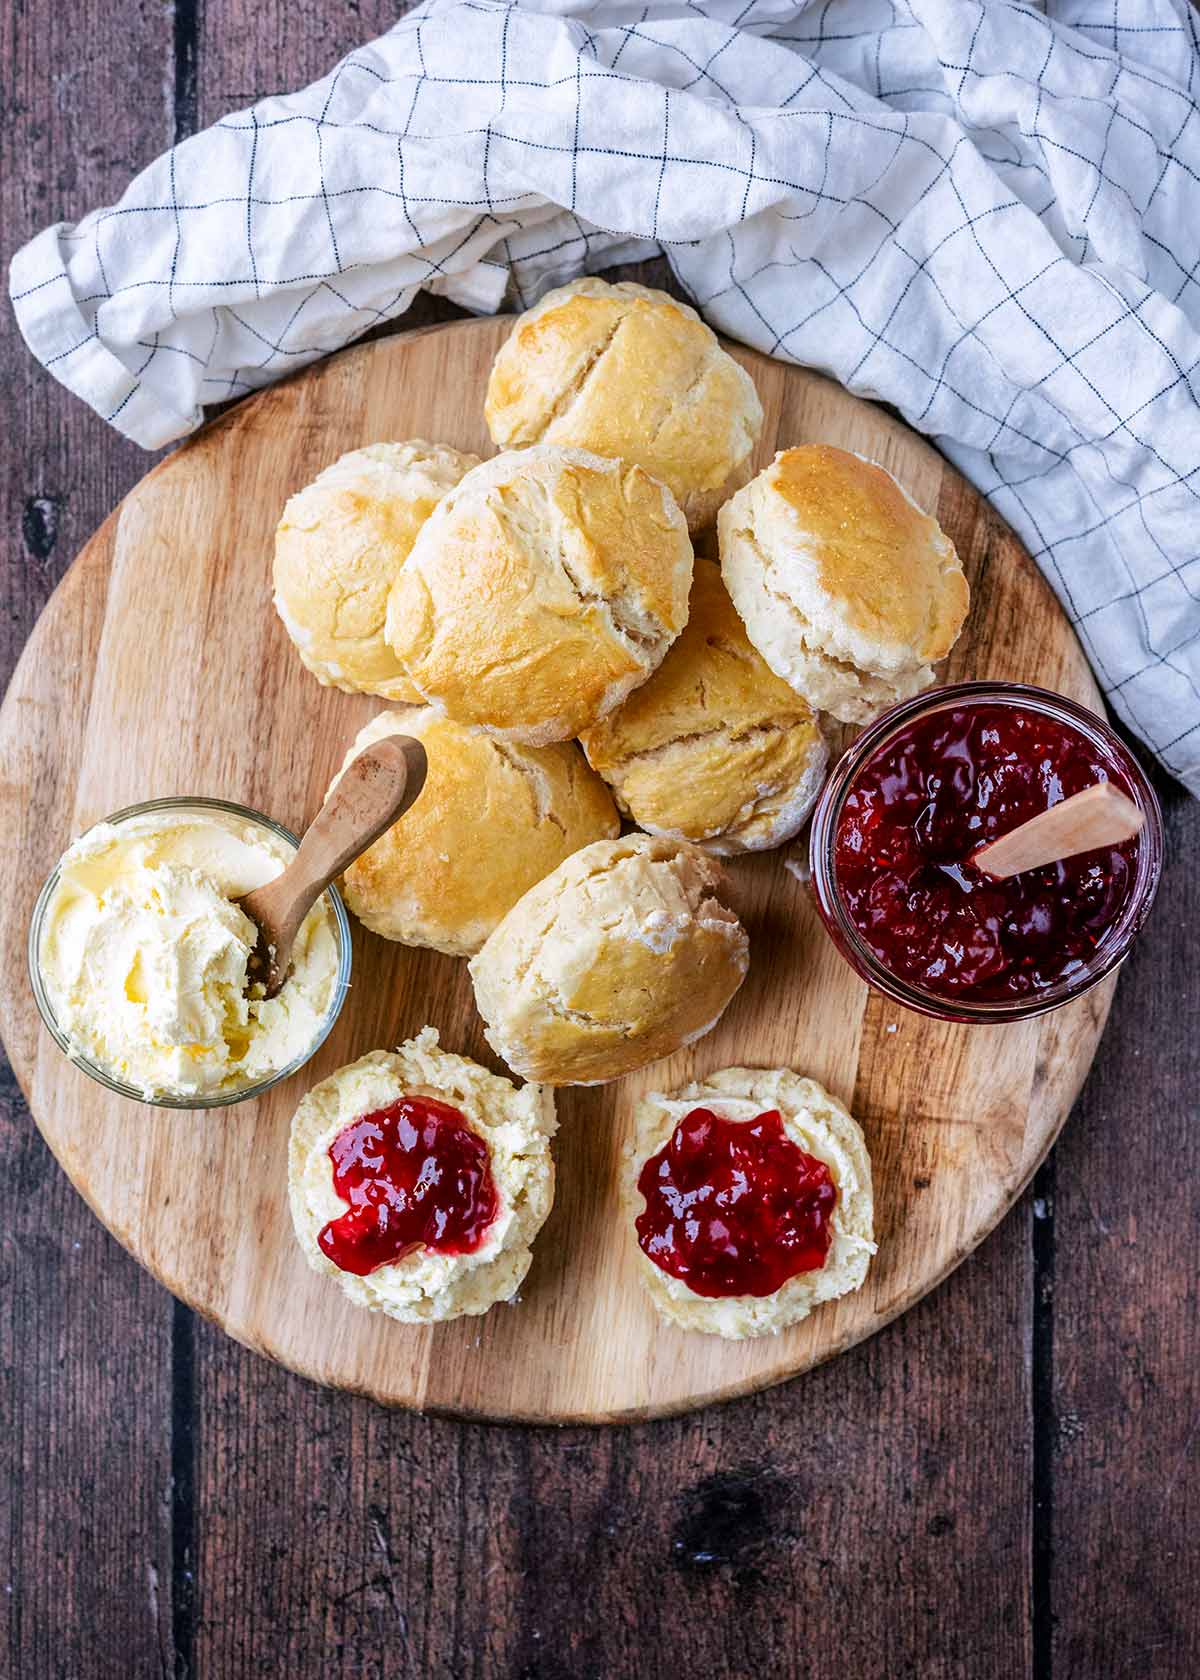 Eight scones on a board, one is cut open with cream and jam on it.